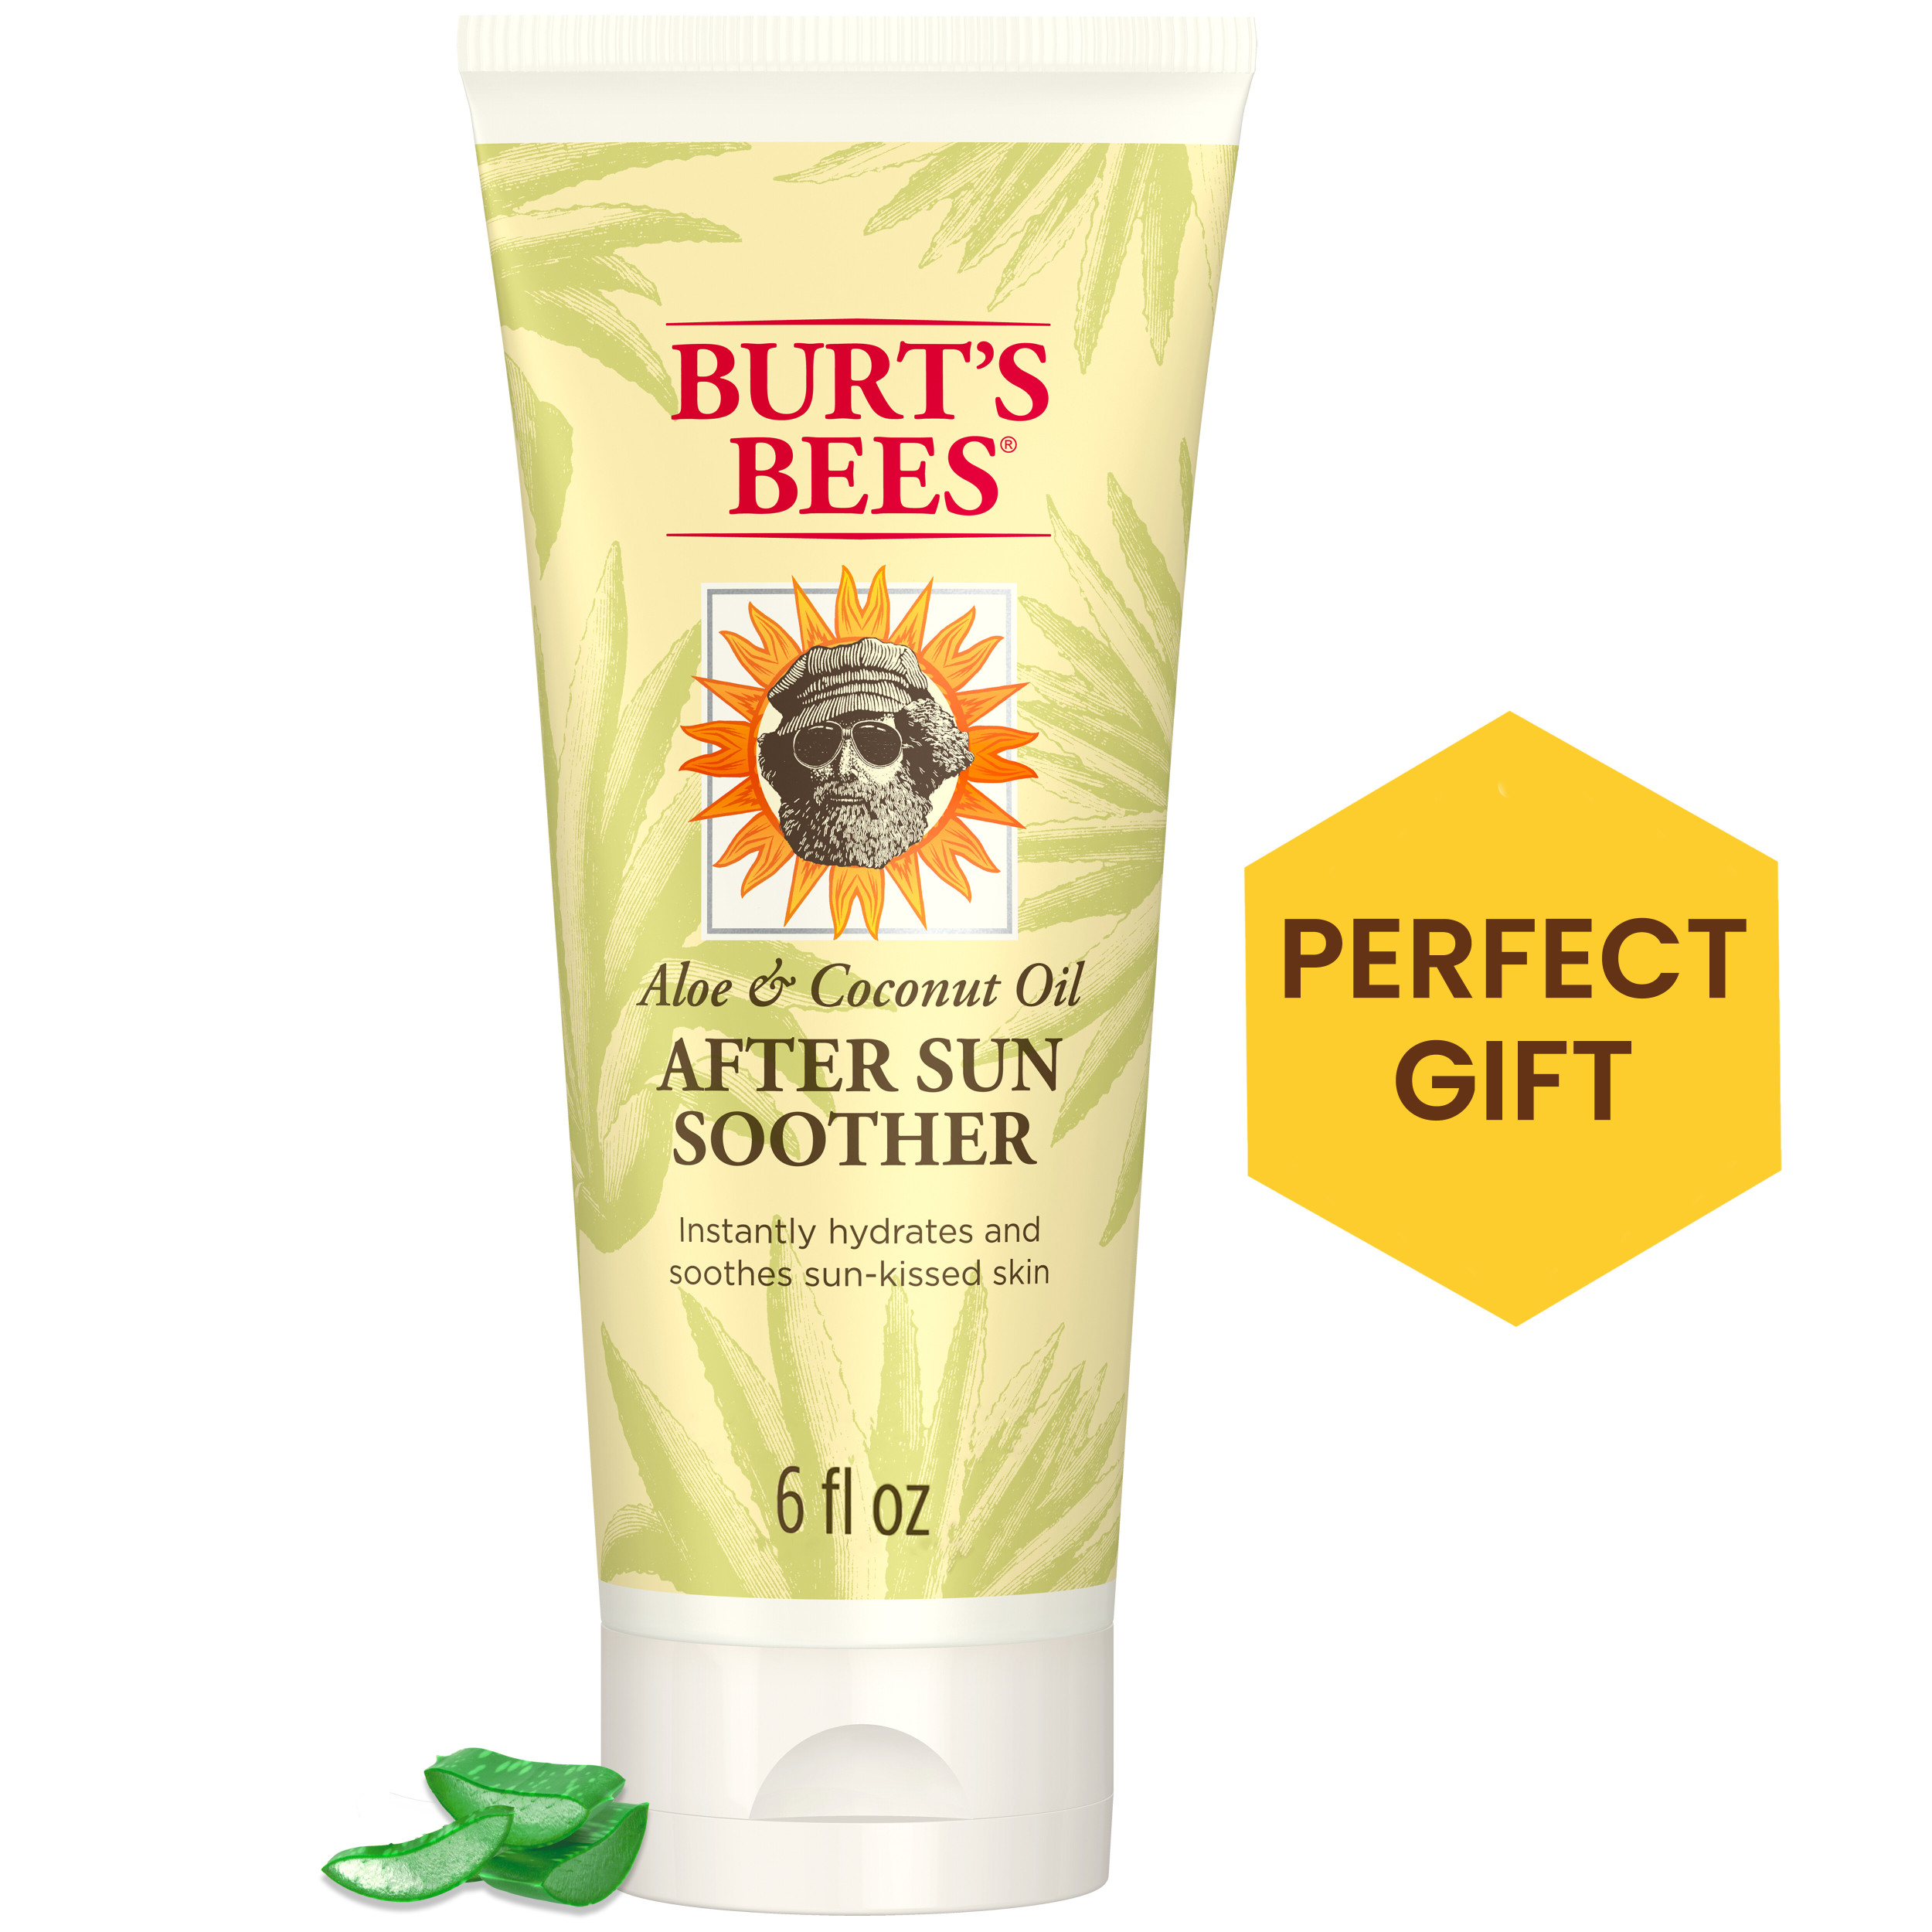 Burt's Bees Aloe & Coconut Oil After-Sun Soother, 6 Oz - image 1 of 10